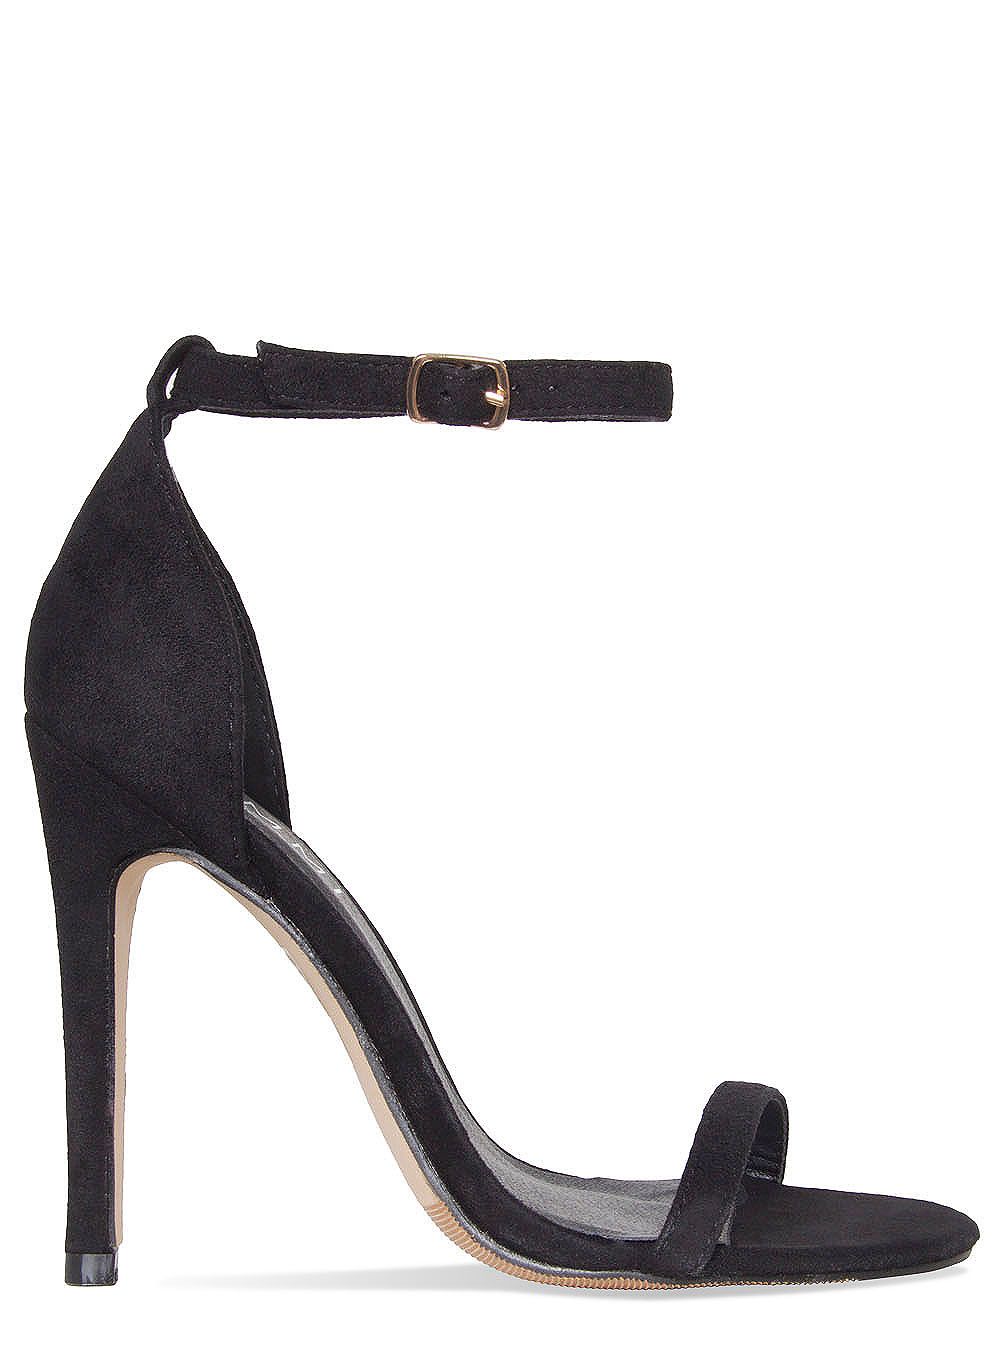 black suede barely there heels